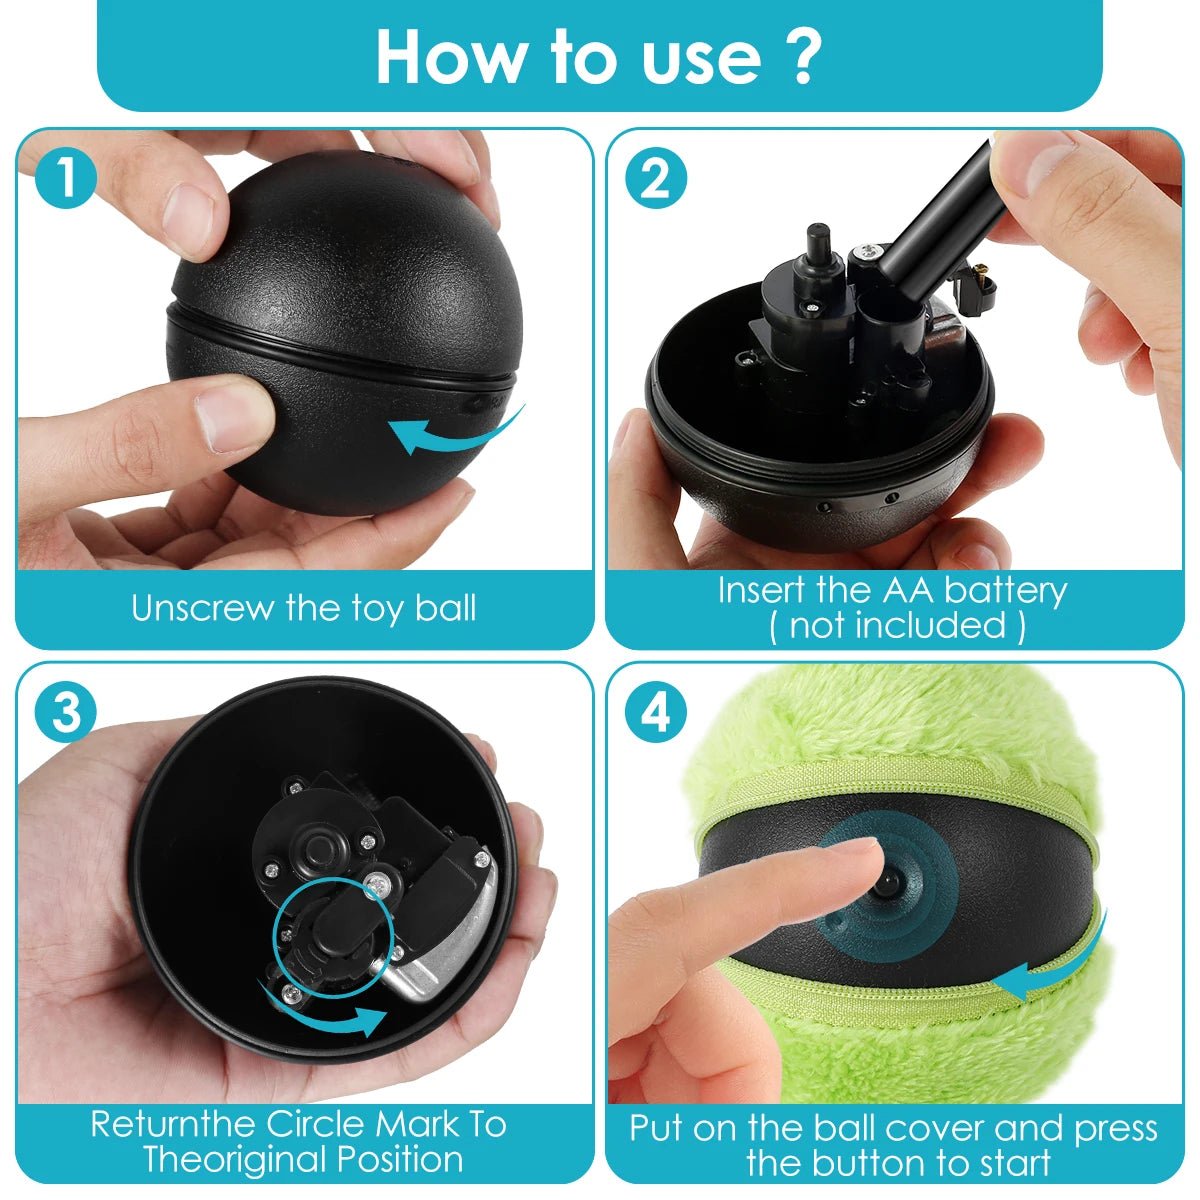 Introducing the perfect playmate for your pup - our Automatic Dog Toy! This innovative dog ball provides